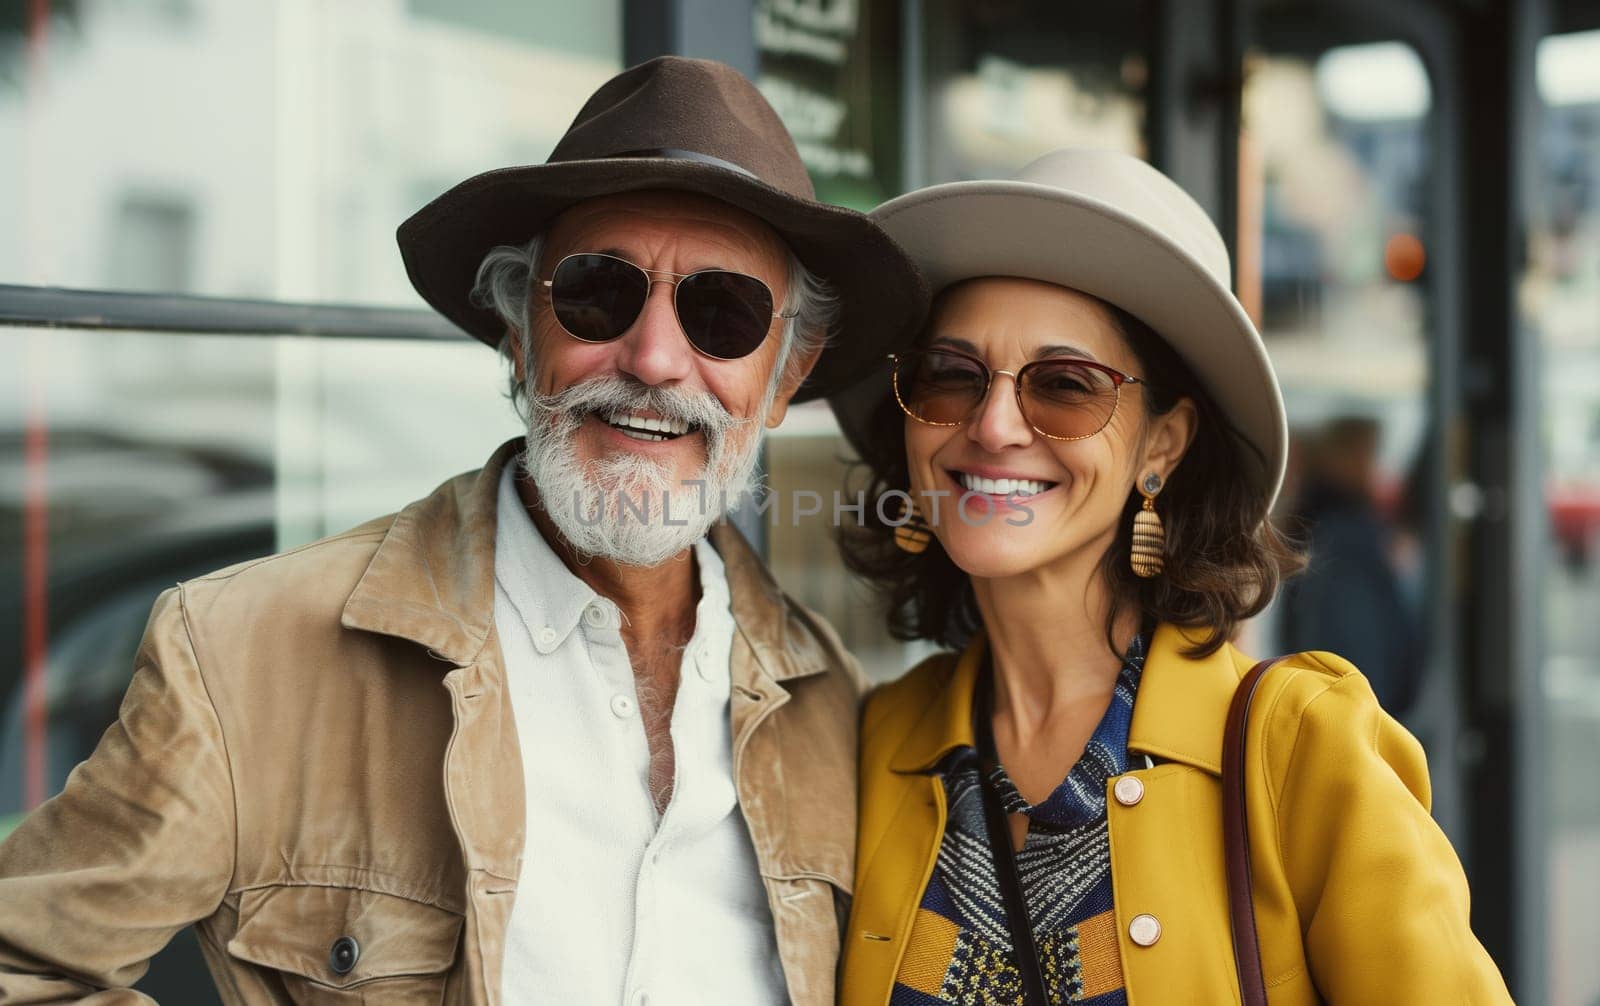 Fashion portrait of stylish happy smiling senior couple together, trendy beautiful elderly woman and man in hats, glasses posing on city street